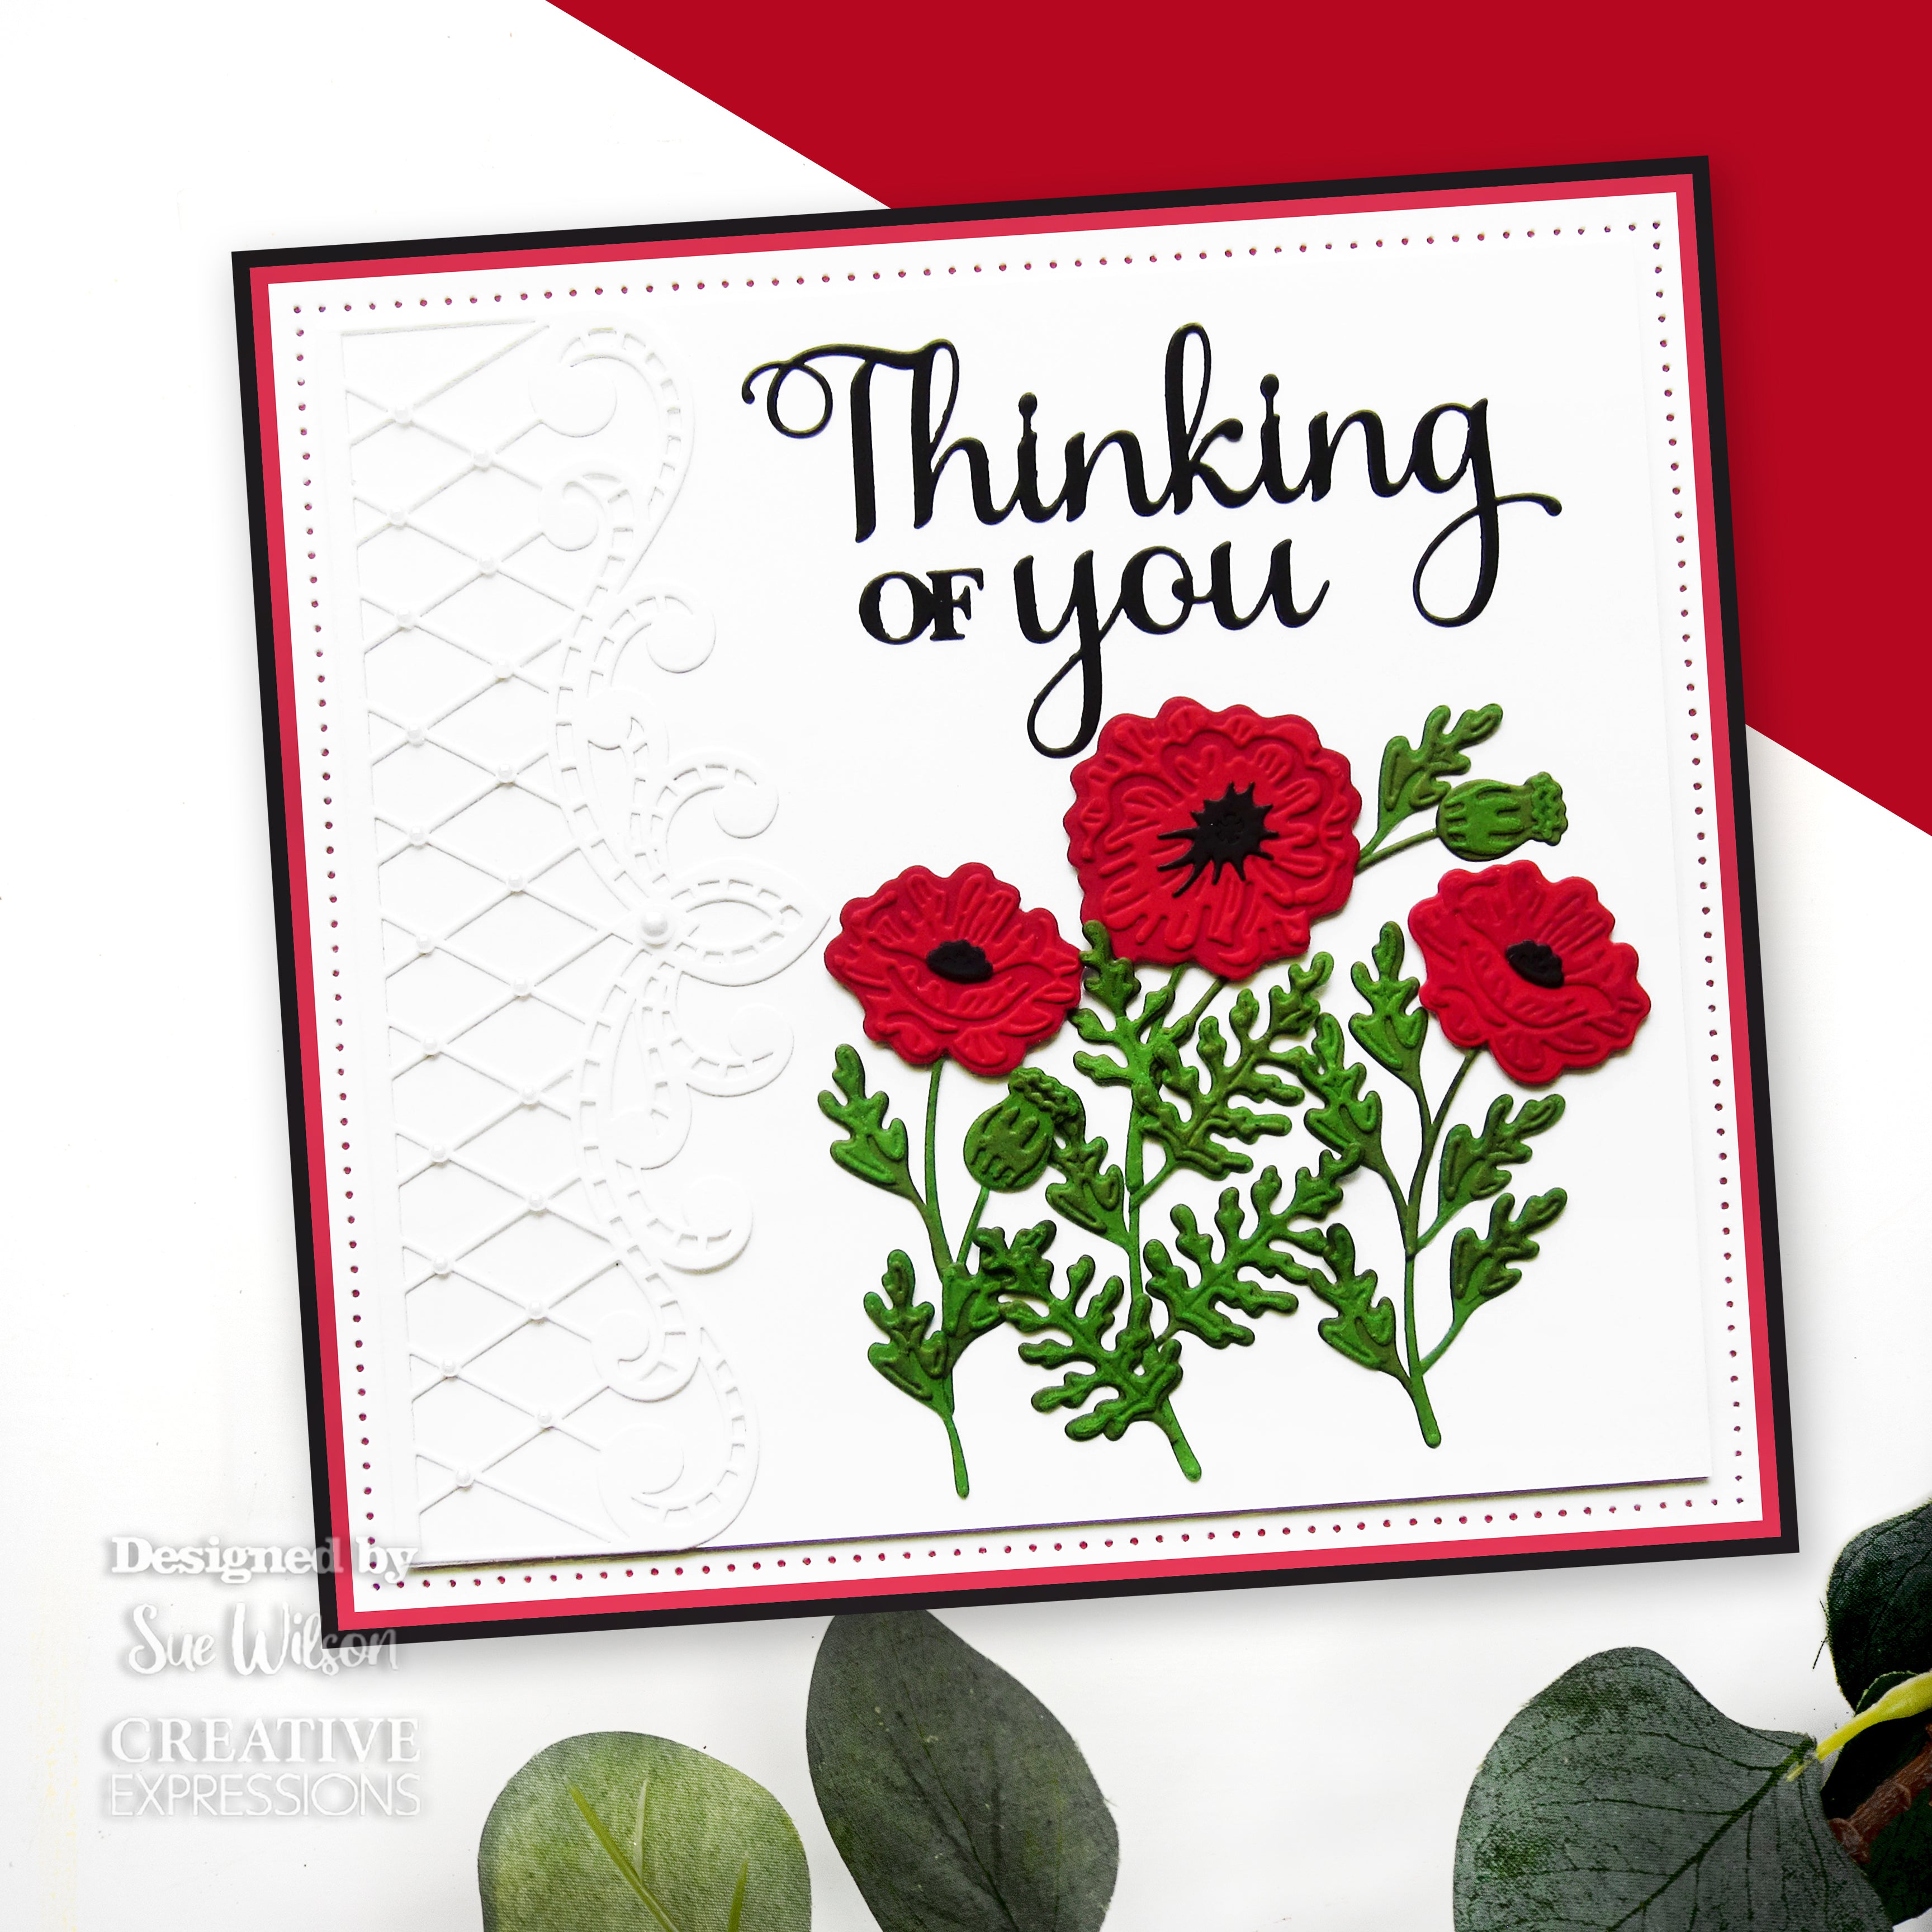 Creative Expressions Sue Wilson Layered Flowers Collection Poppy Craft Die